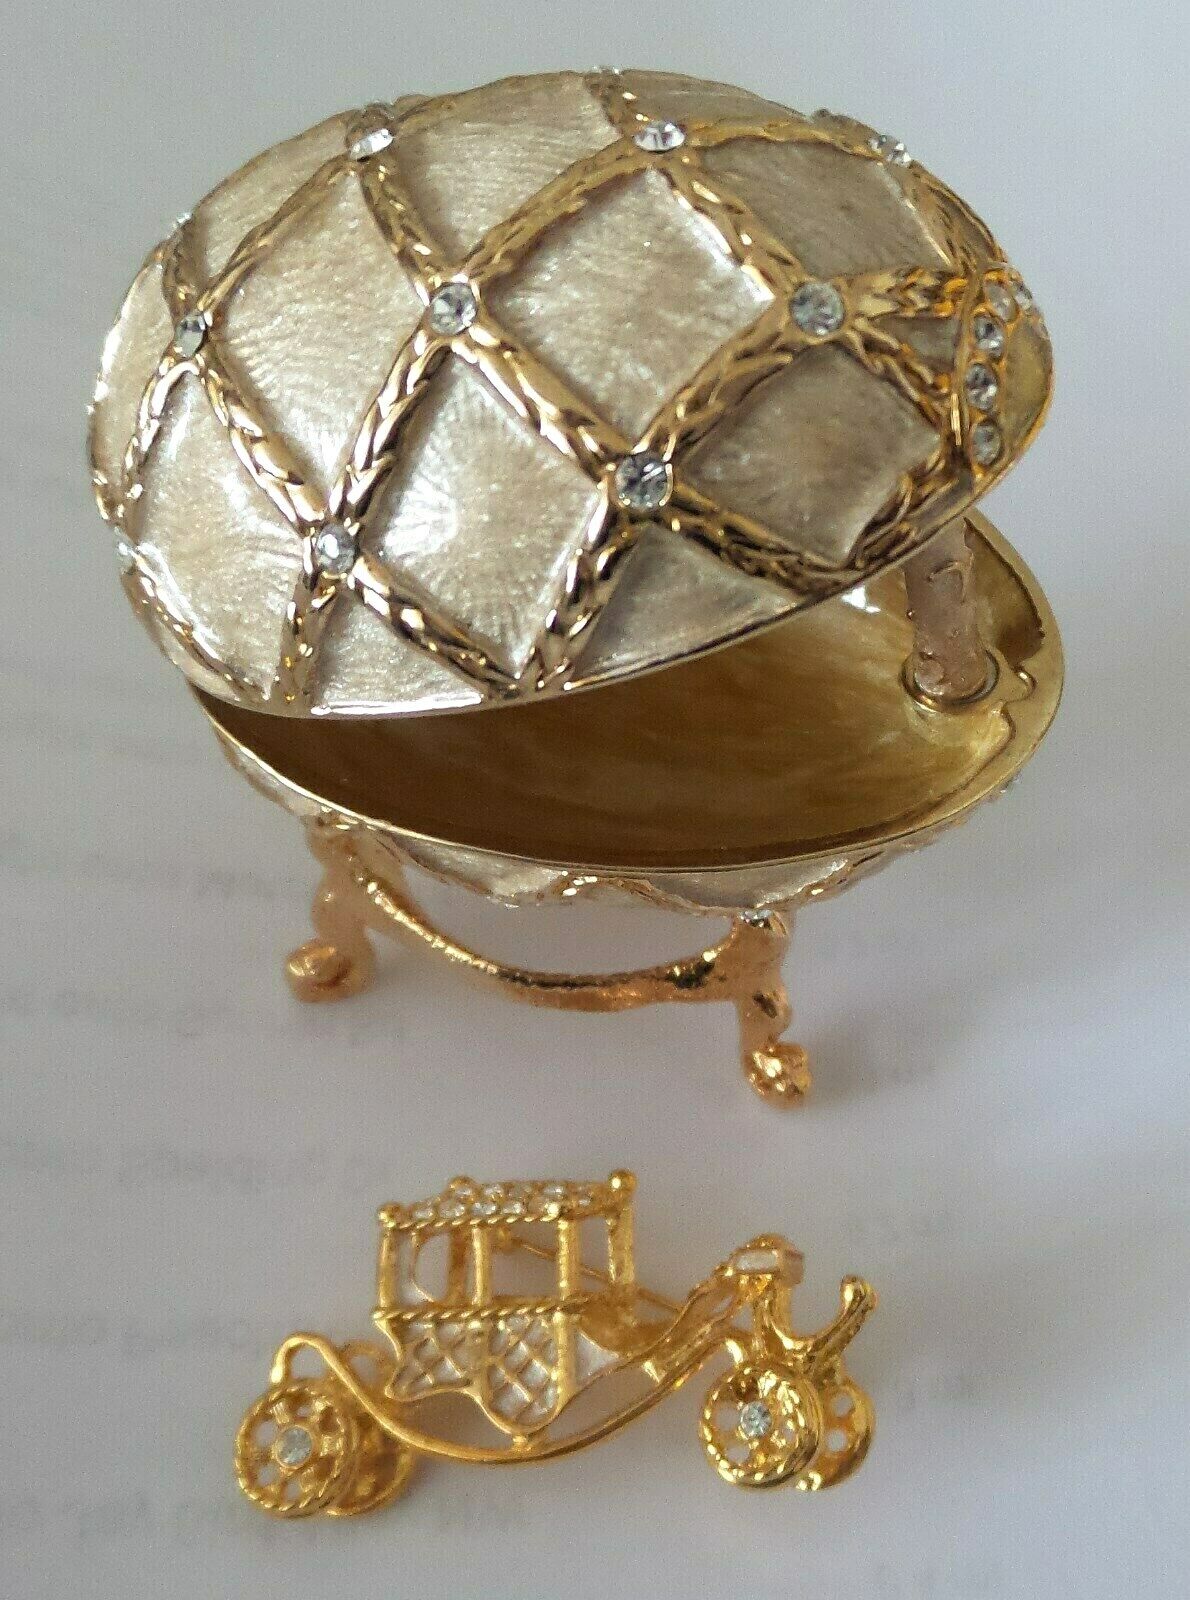 FABERGE EGG WITH CRYSTALS BOX ON STAND WITH GOLD CARRIAGE BROOCH